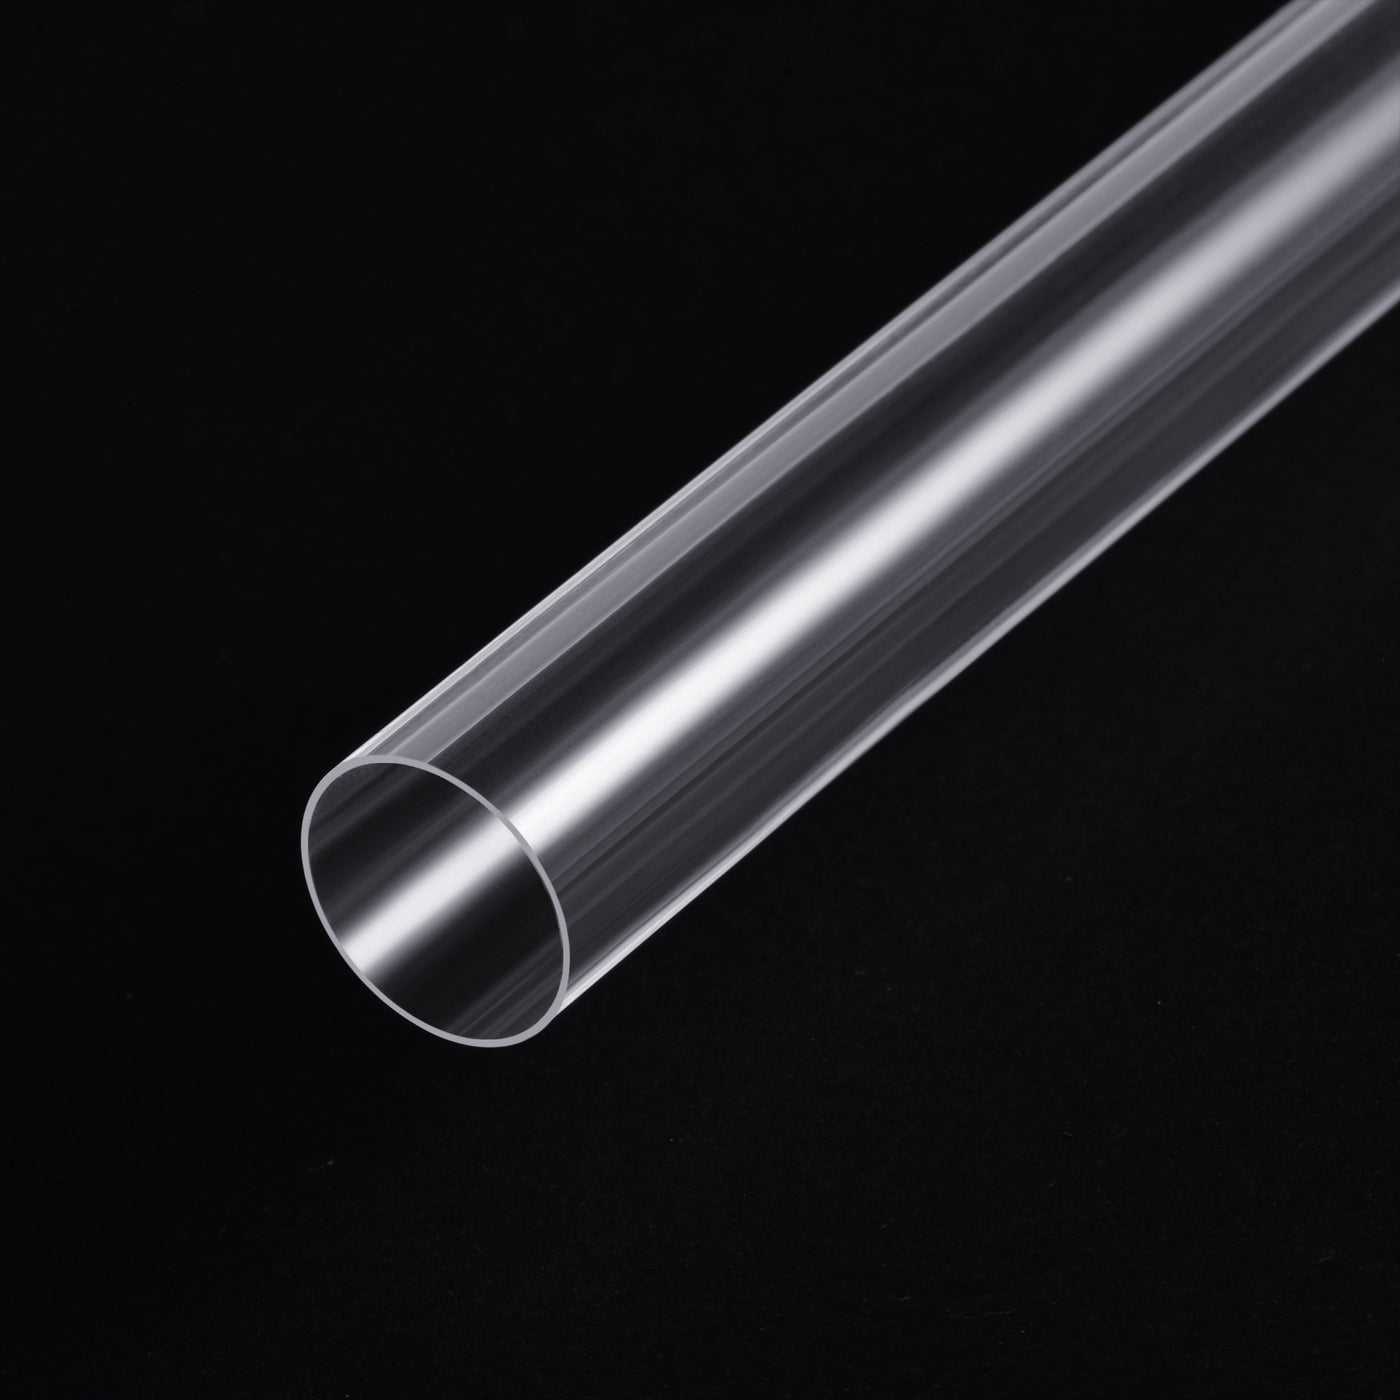 Uxcell Uxcell 3pcs Clear Rigid PVC Pipe 20mm ID x 21mm x 1.5ft, 0.02" Wall Round Tube Tubing